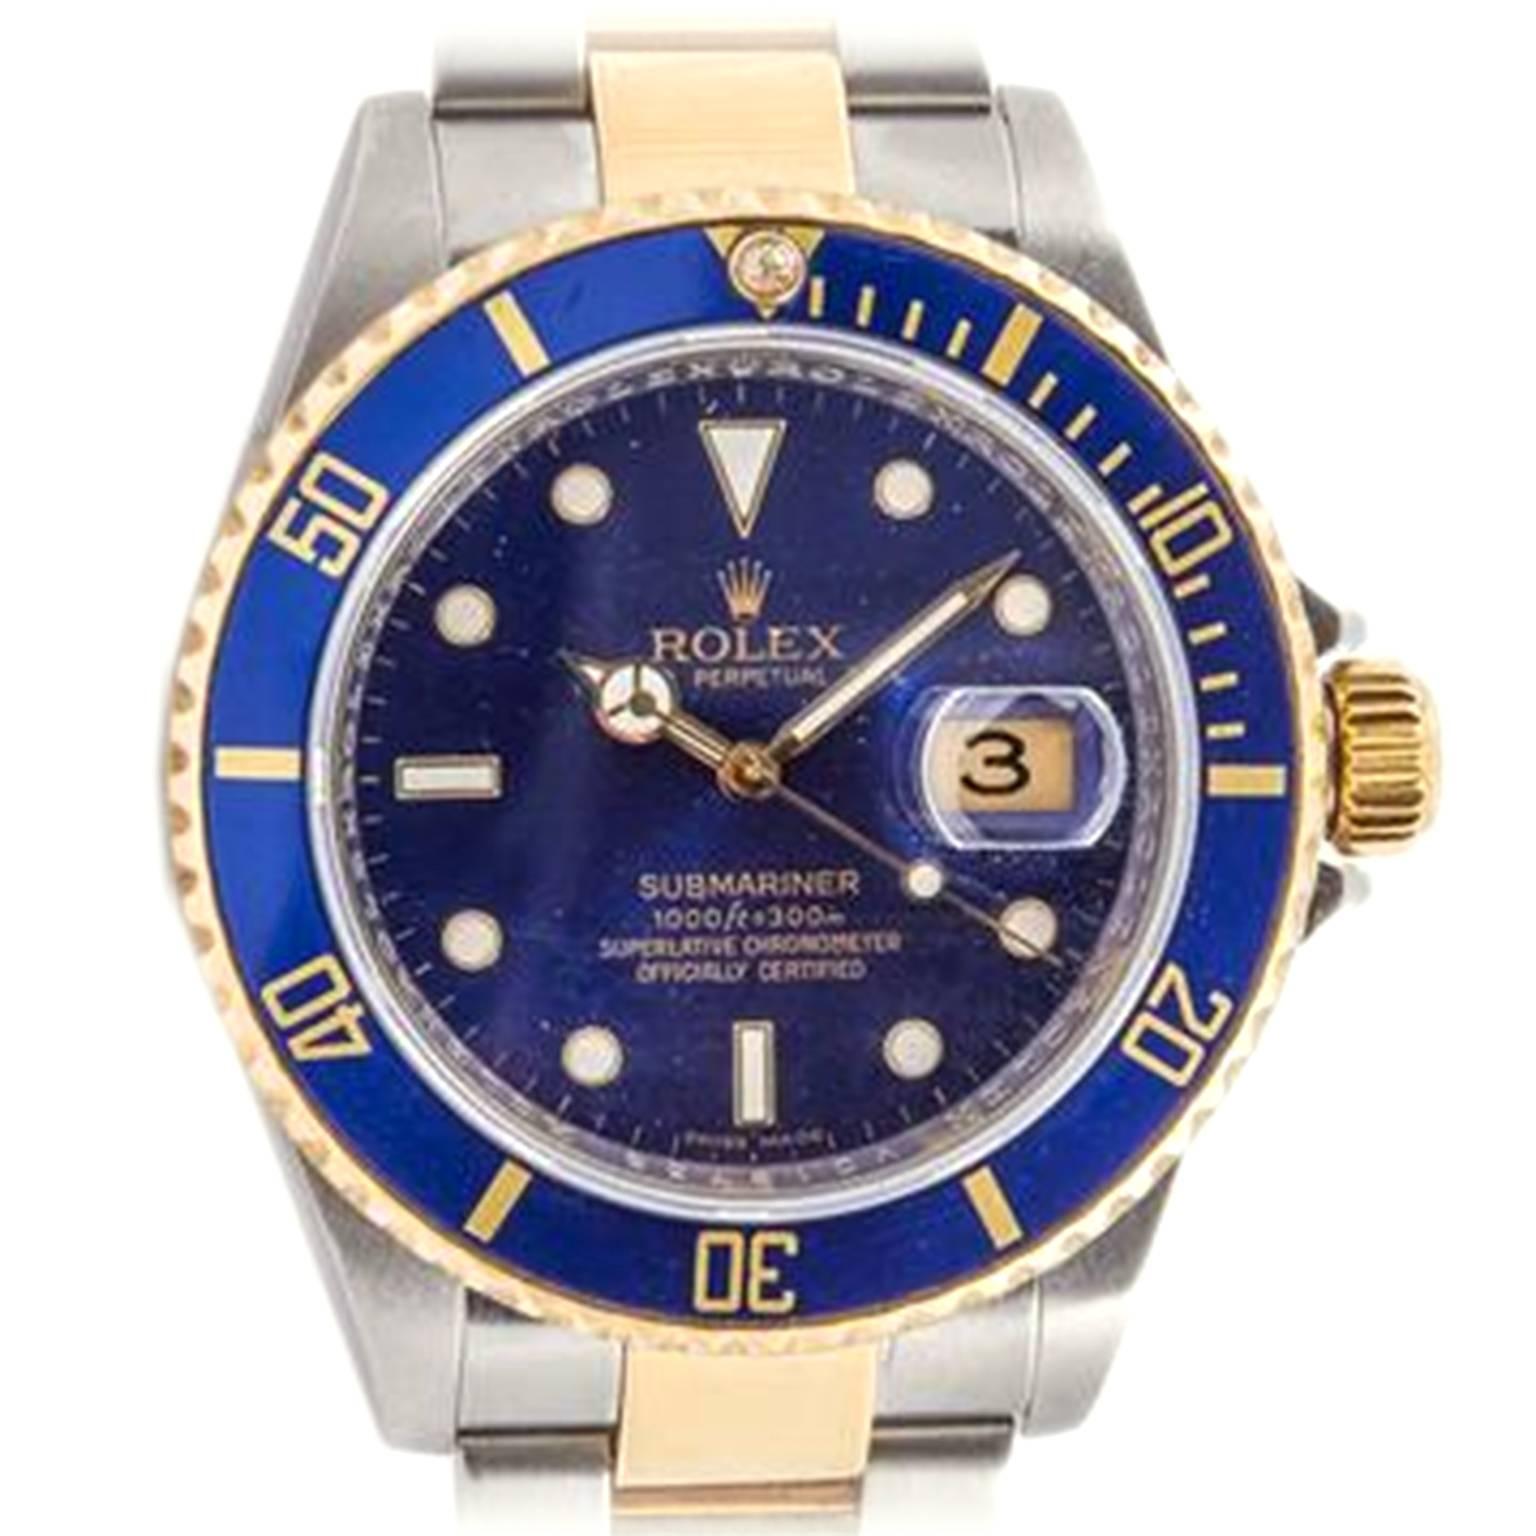 Stainless steel and 18K yellow gold two-tone Rolex Oyster Perpetual Date Submariner, Ref. 16613T, circa 2008, is water-resistant to 1000 feet, self-winding  with date window at 3 o'clock. The 40mm case features a 18K Triplock winding crown protected